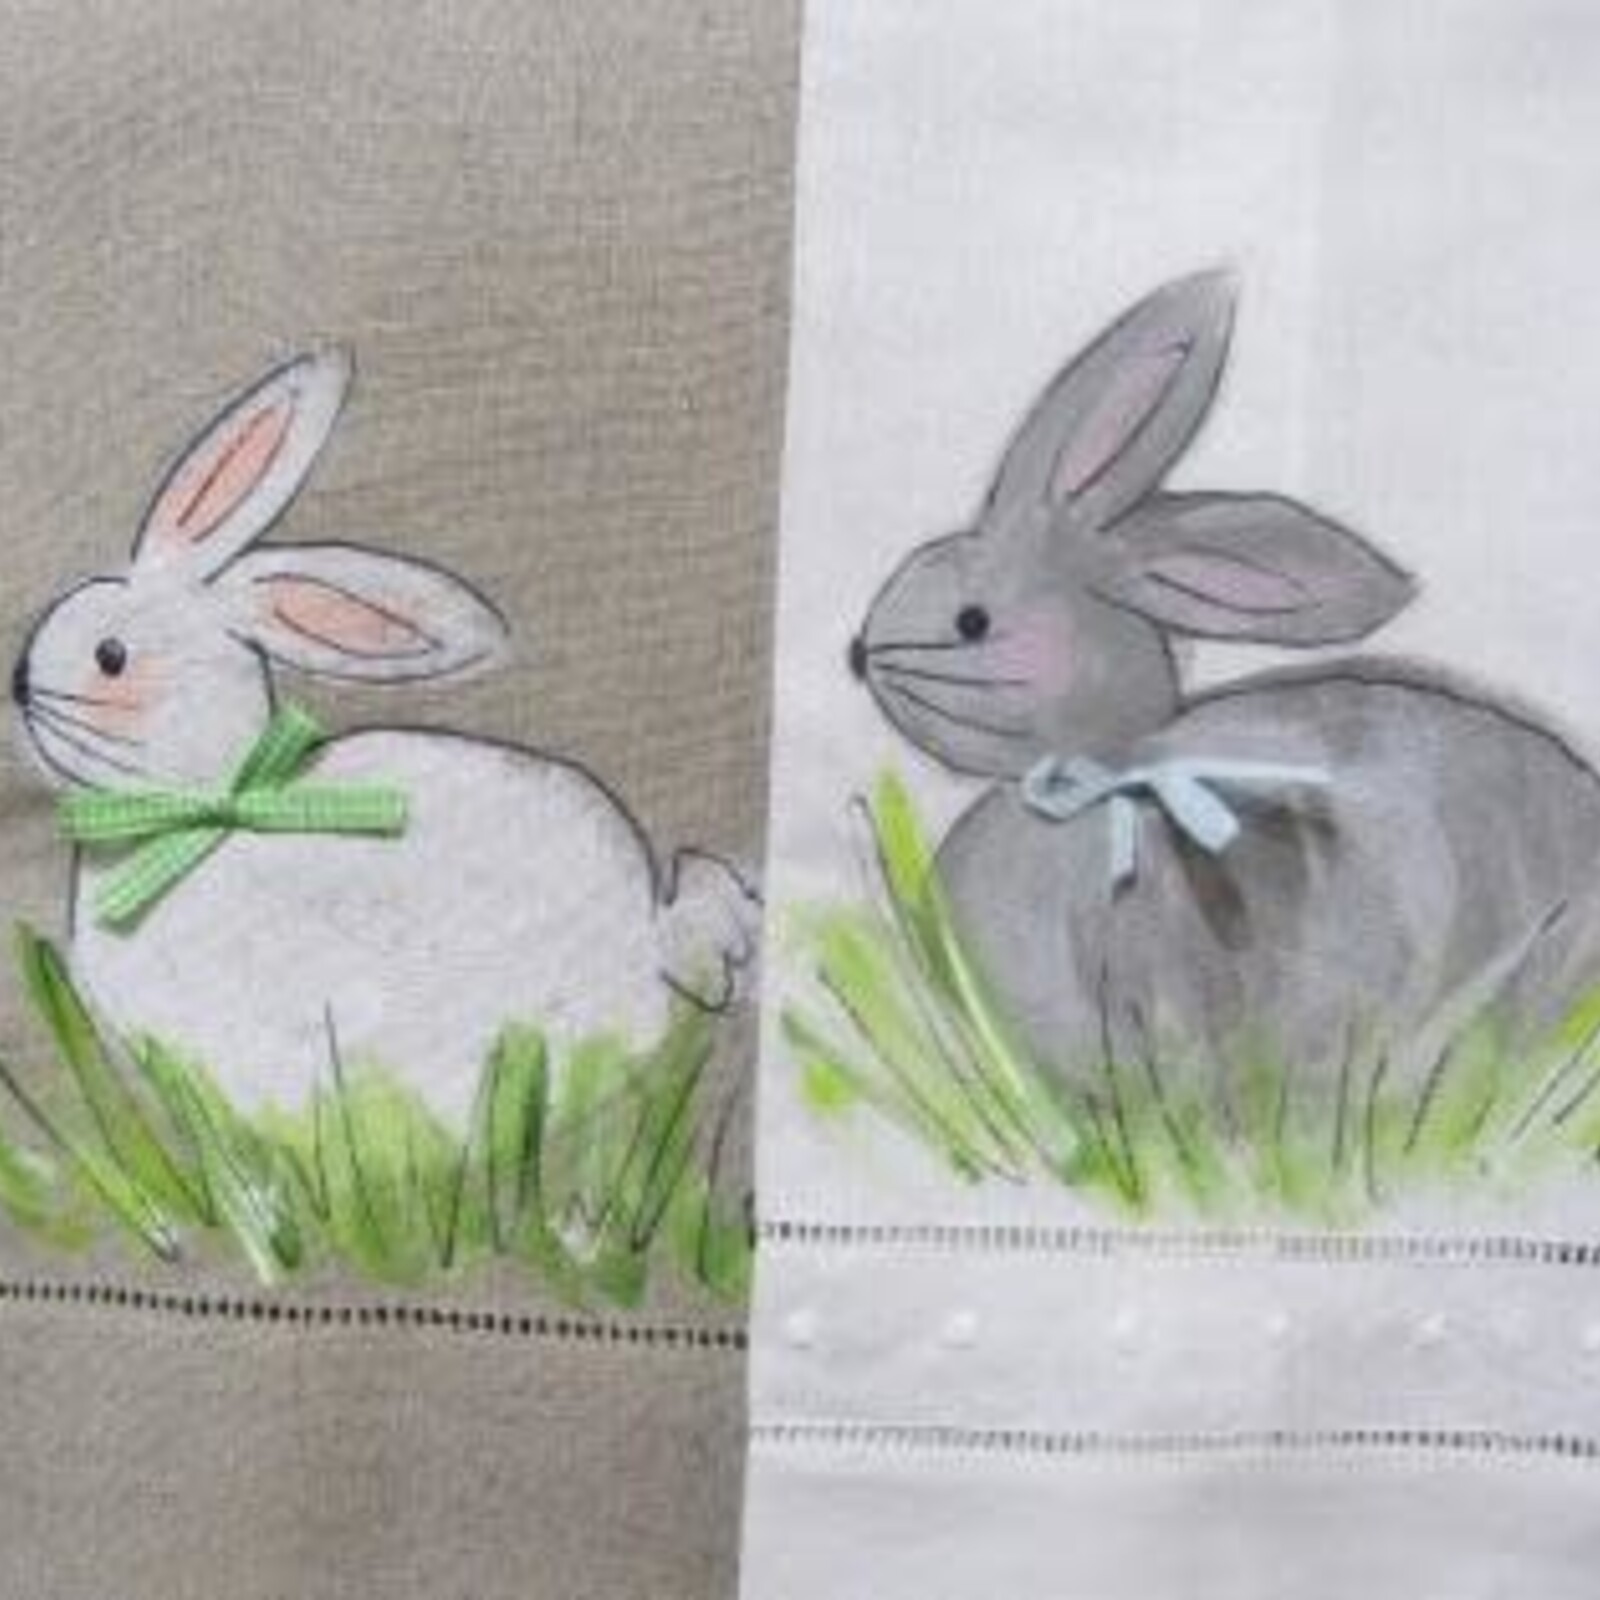 DZ Linens Hemstitched Towels w/Vintage  Simplicity Image. Hand Paint. Bunny BNT011 loading=